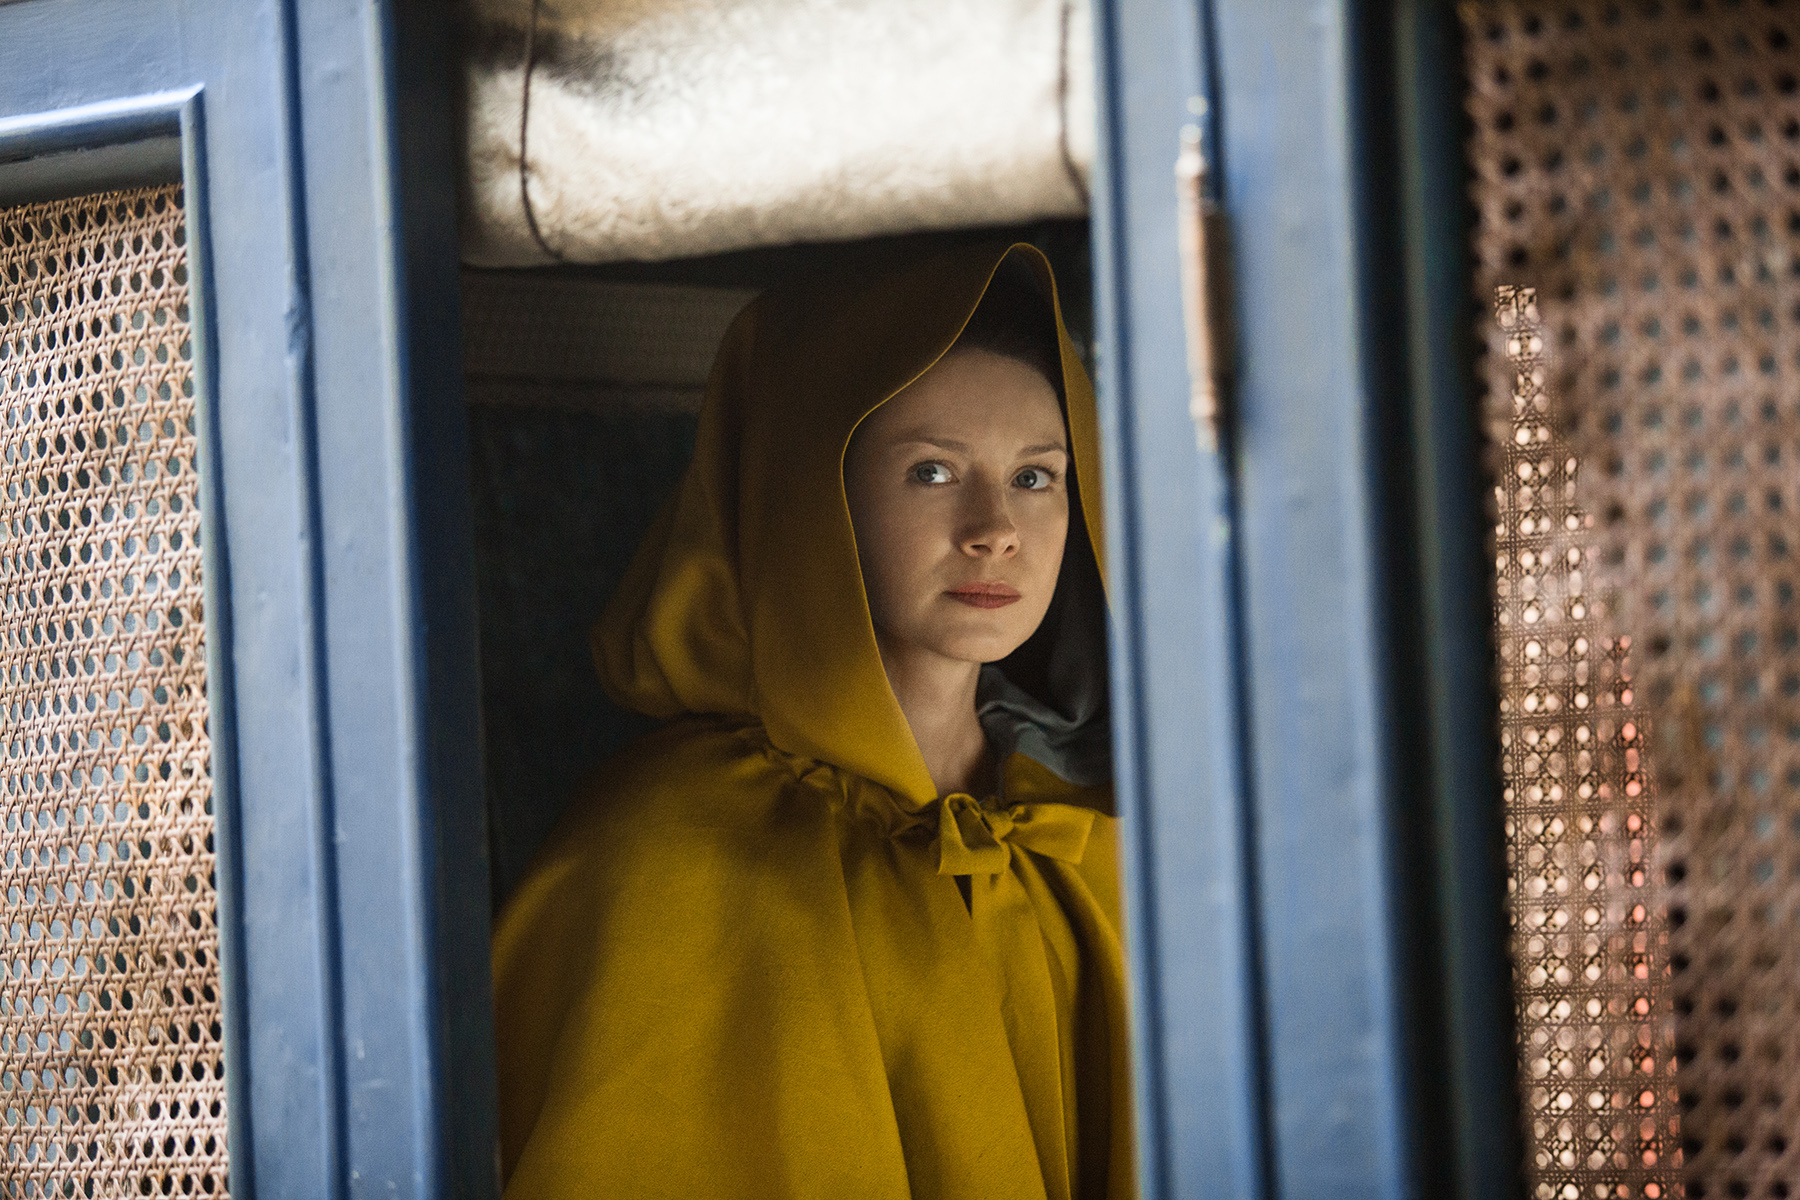 Claire in her yellow cloak, riding in the carriage. Why, Claire, why?